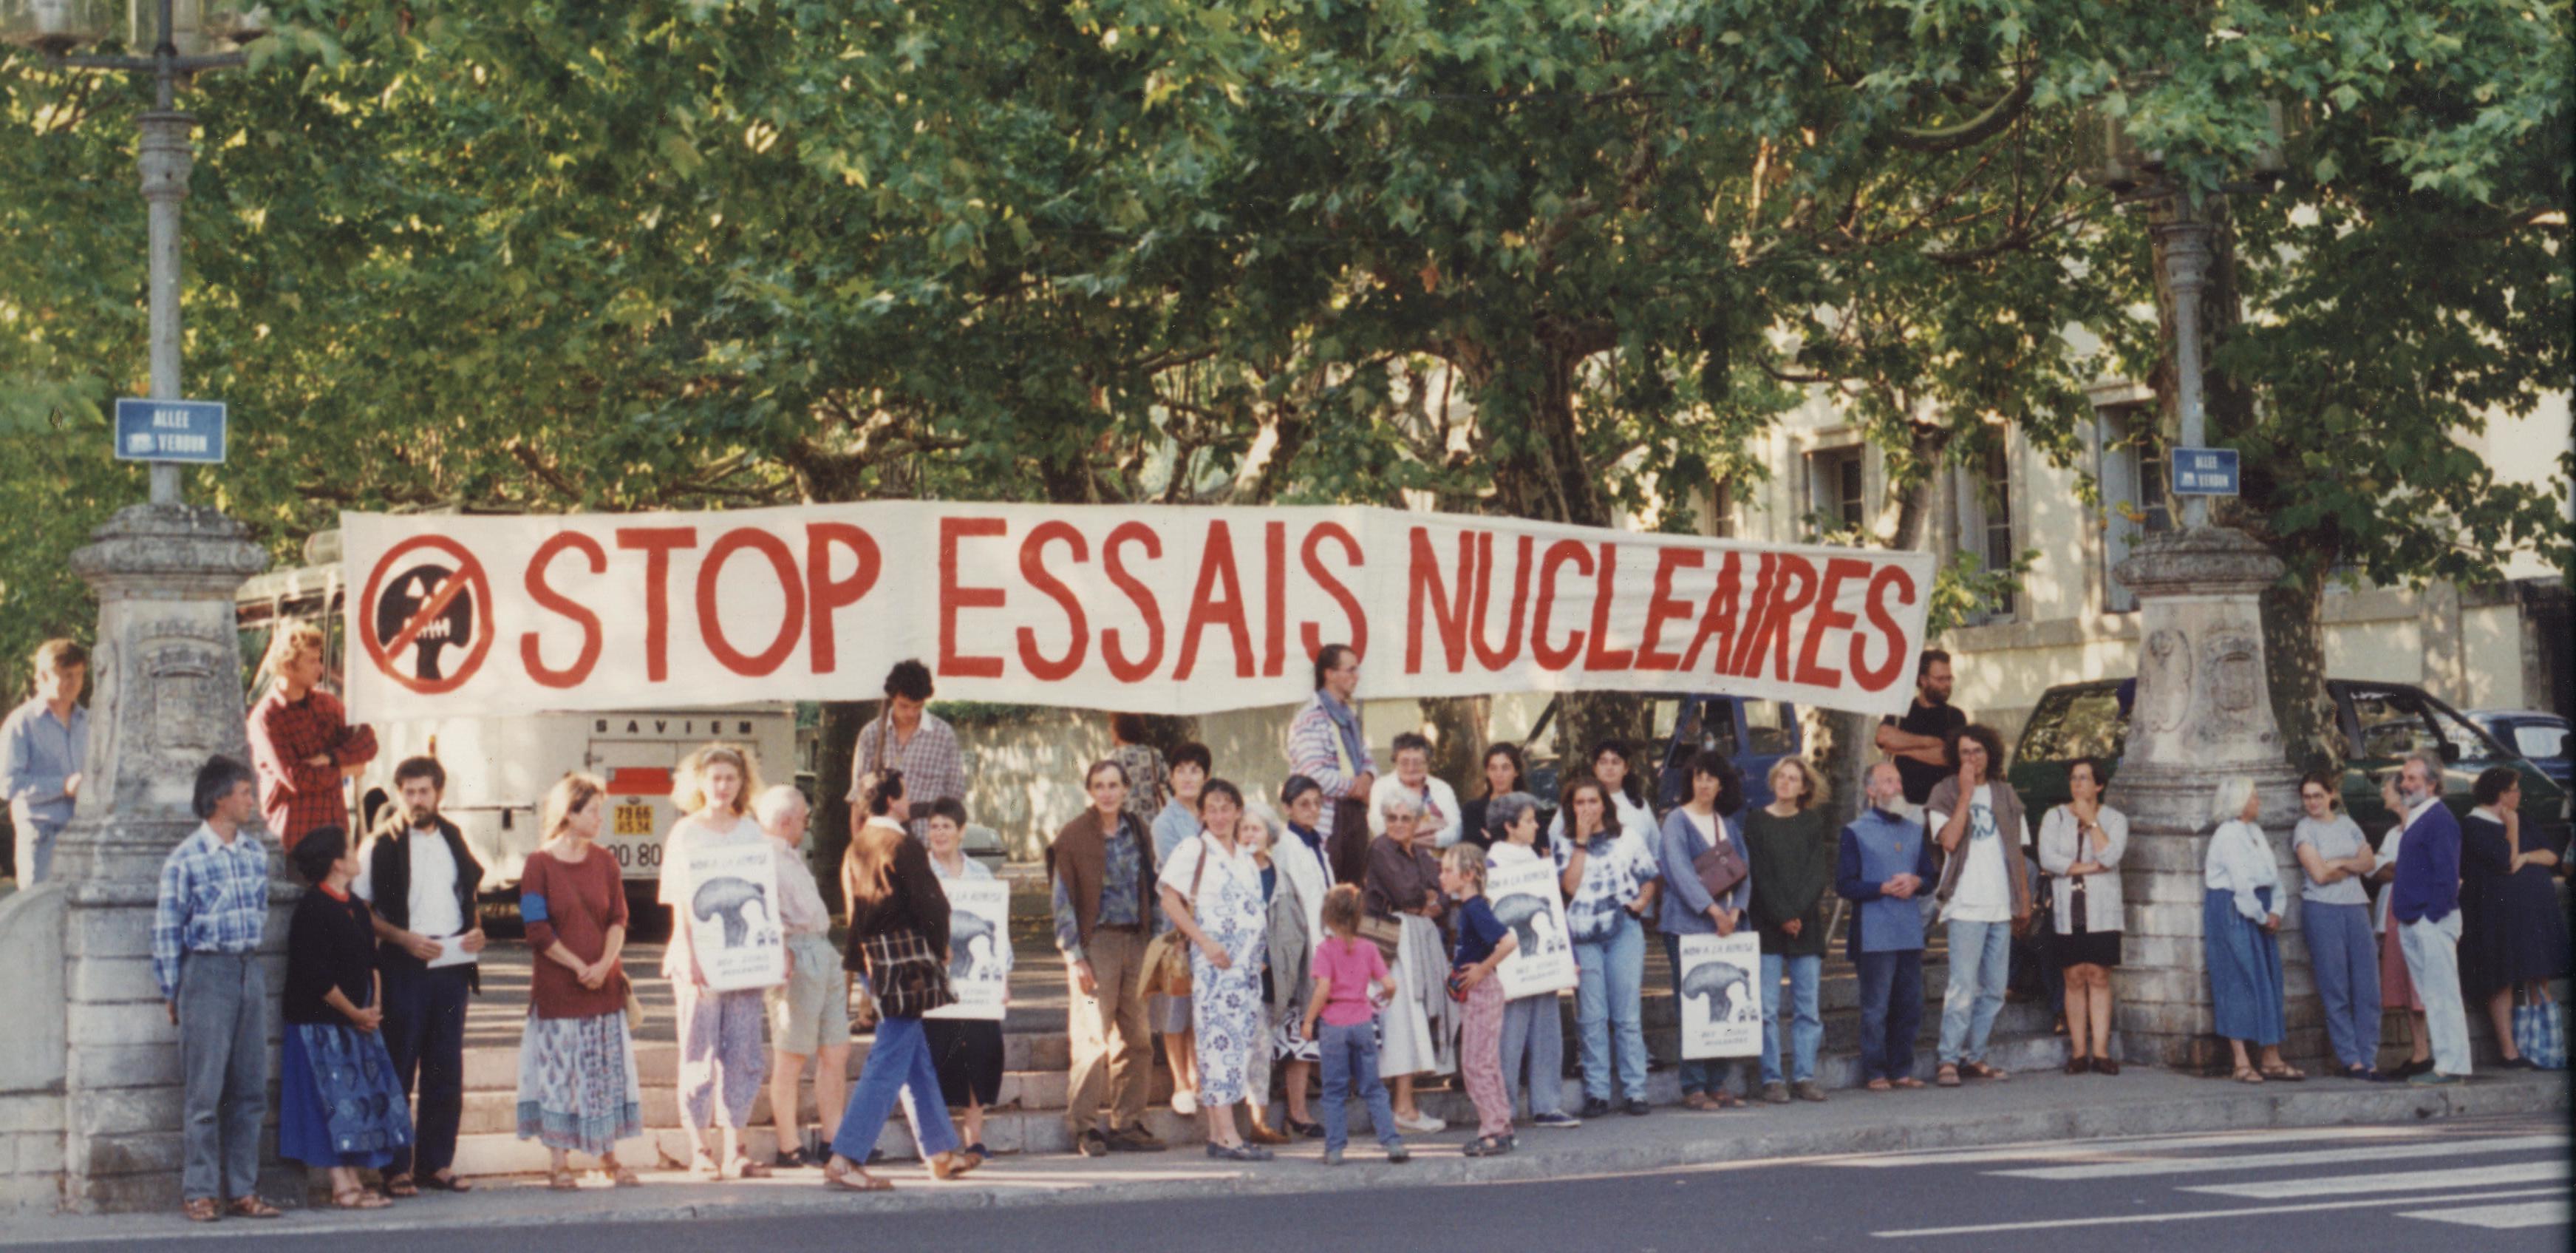 Demonstration in Lyon, France, in the 1980s against nuclear weapons tests. (Wikimedia)